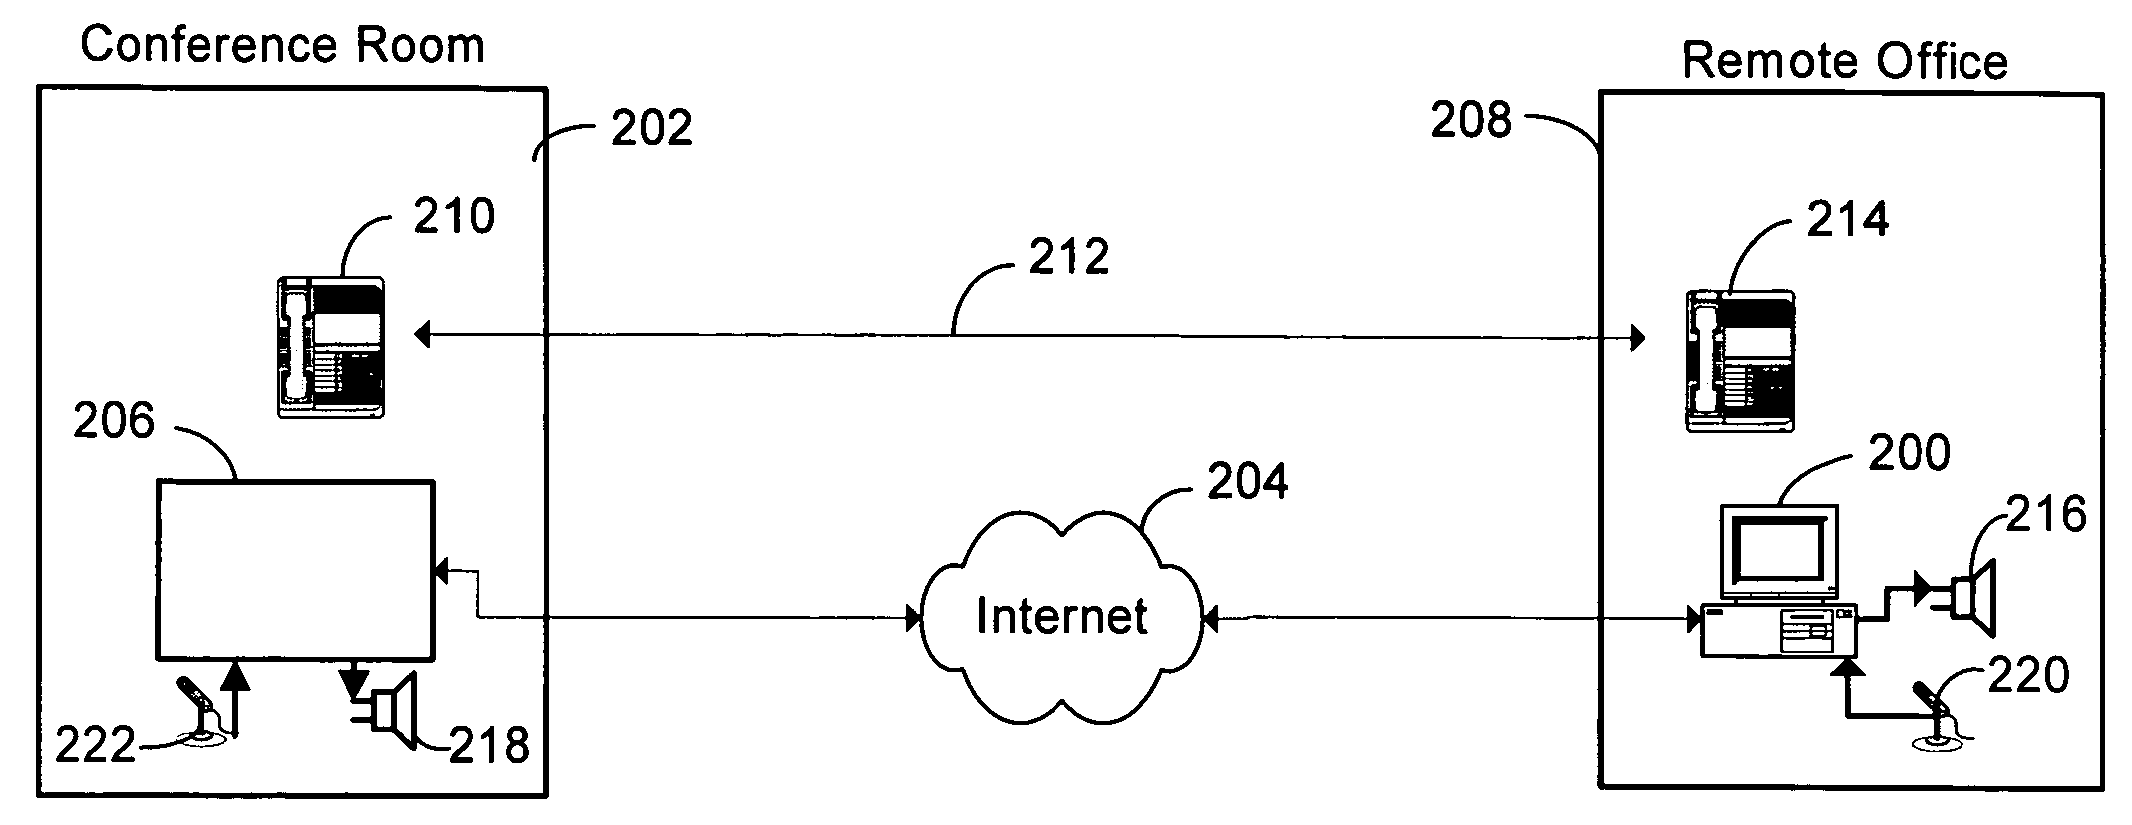 System and process for discovery of network-connected devices at remote sites using audio-based discovery techniques